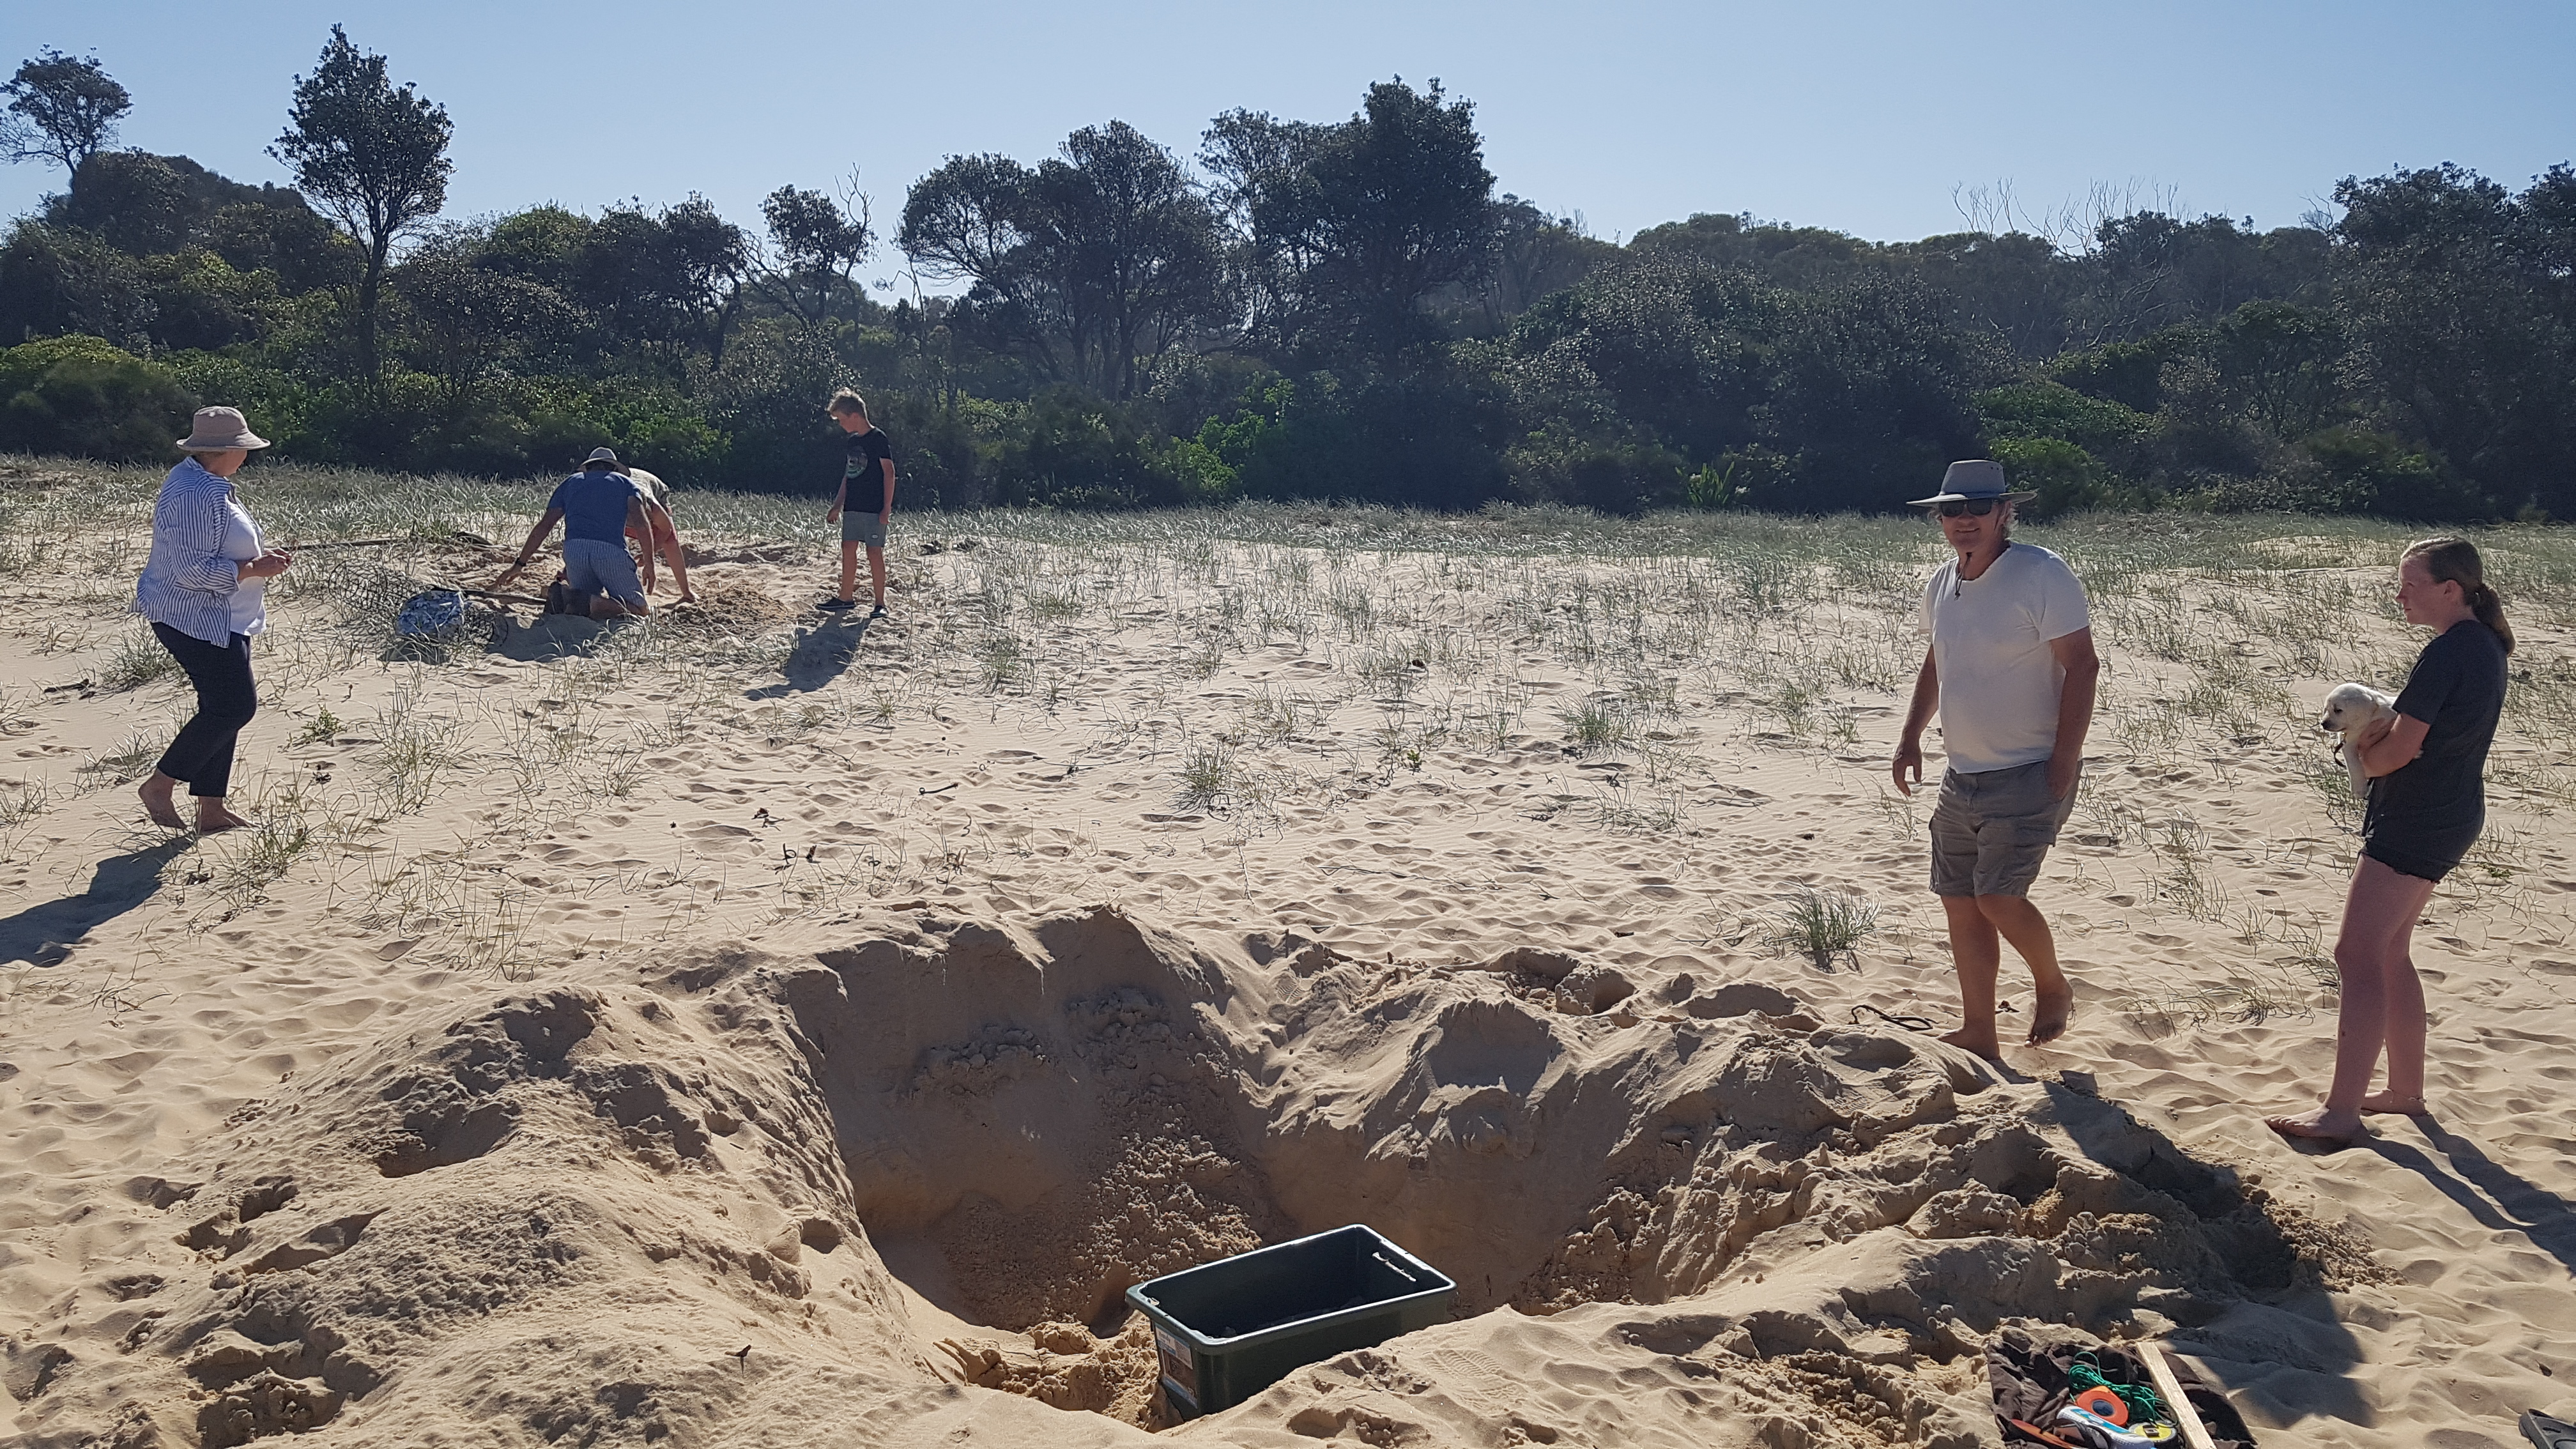 6 people surround a large hole in the sand, one woman holding a small dog, a large plastic tub in the centre of the hole 